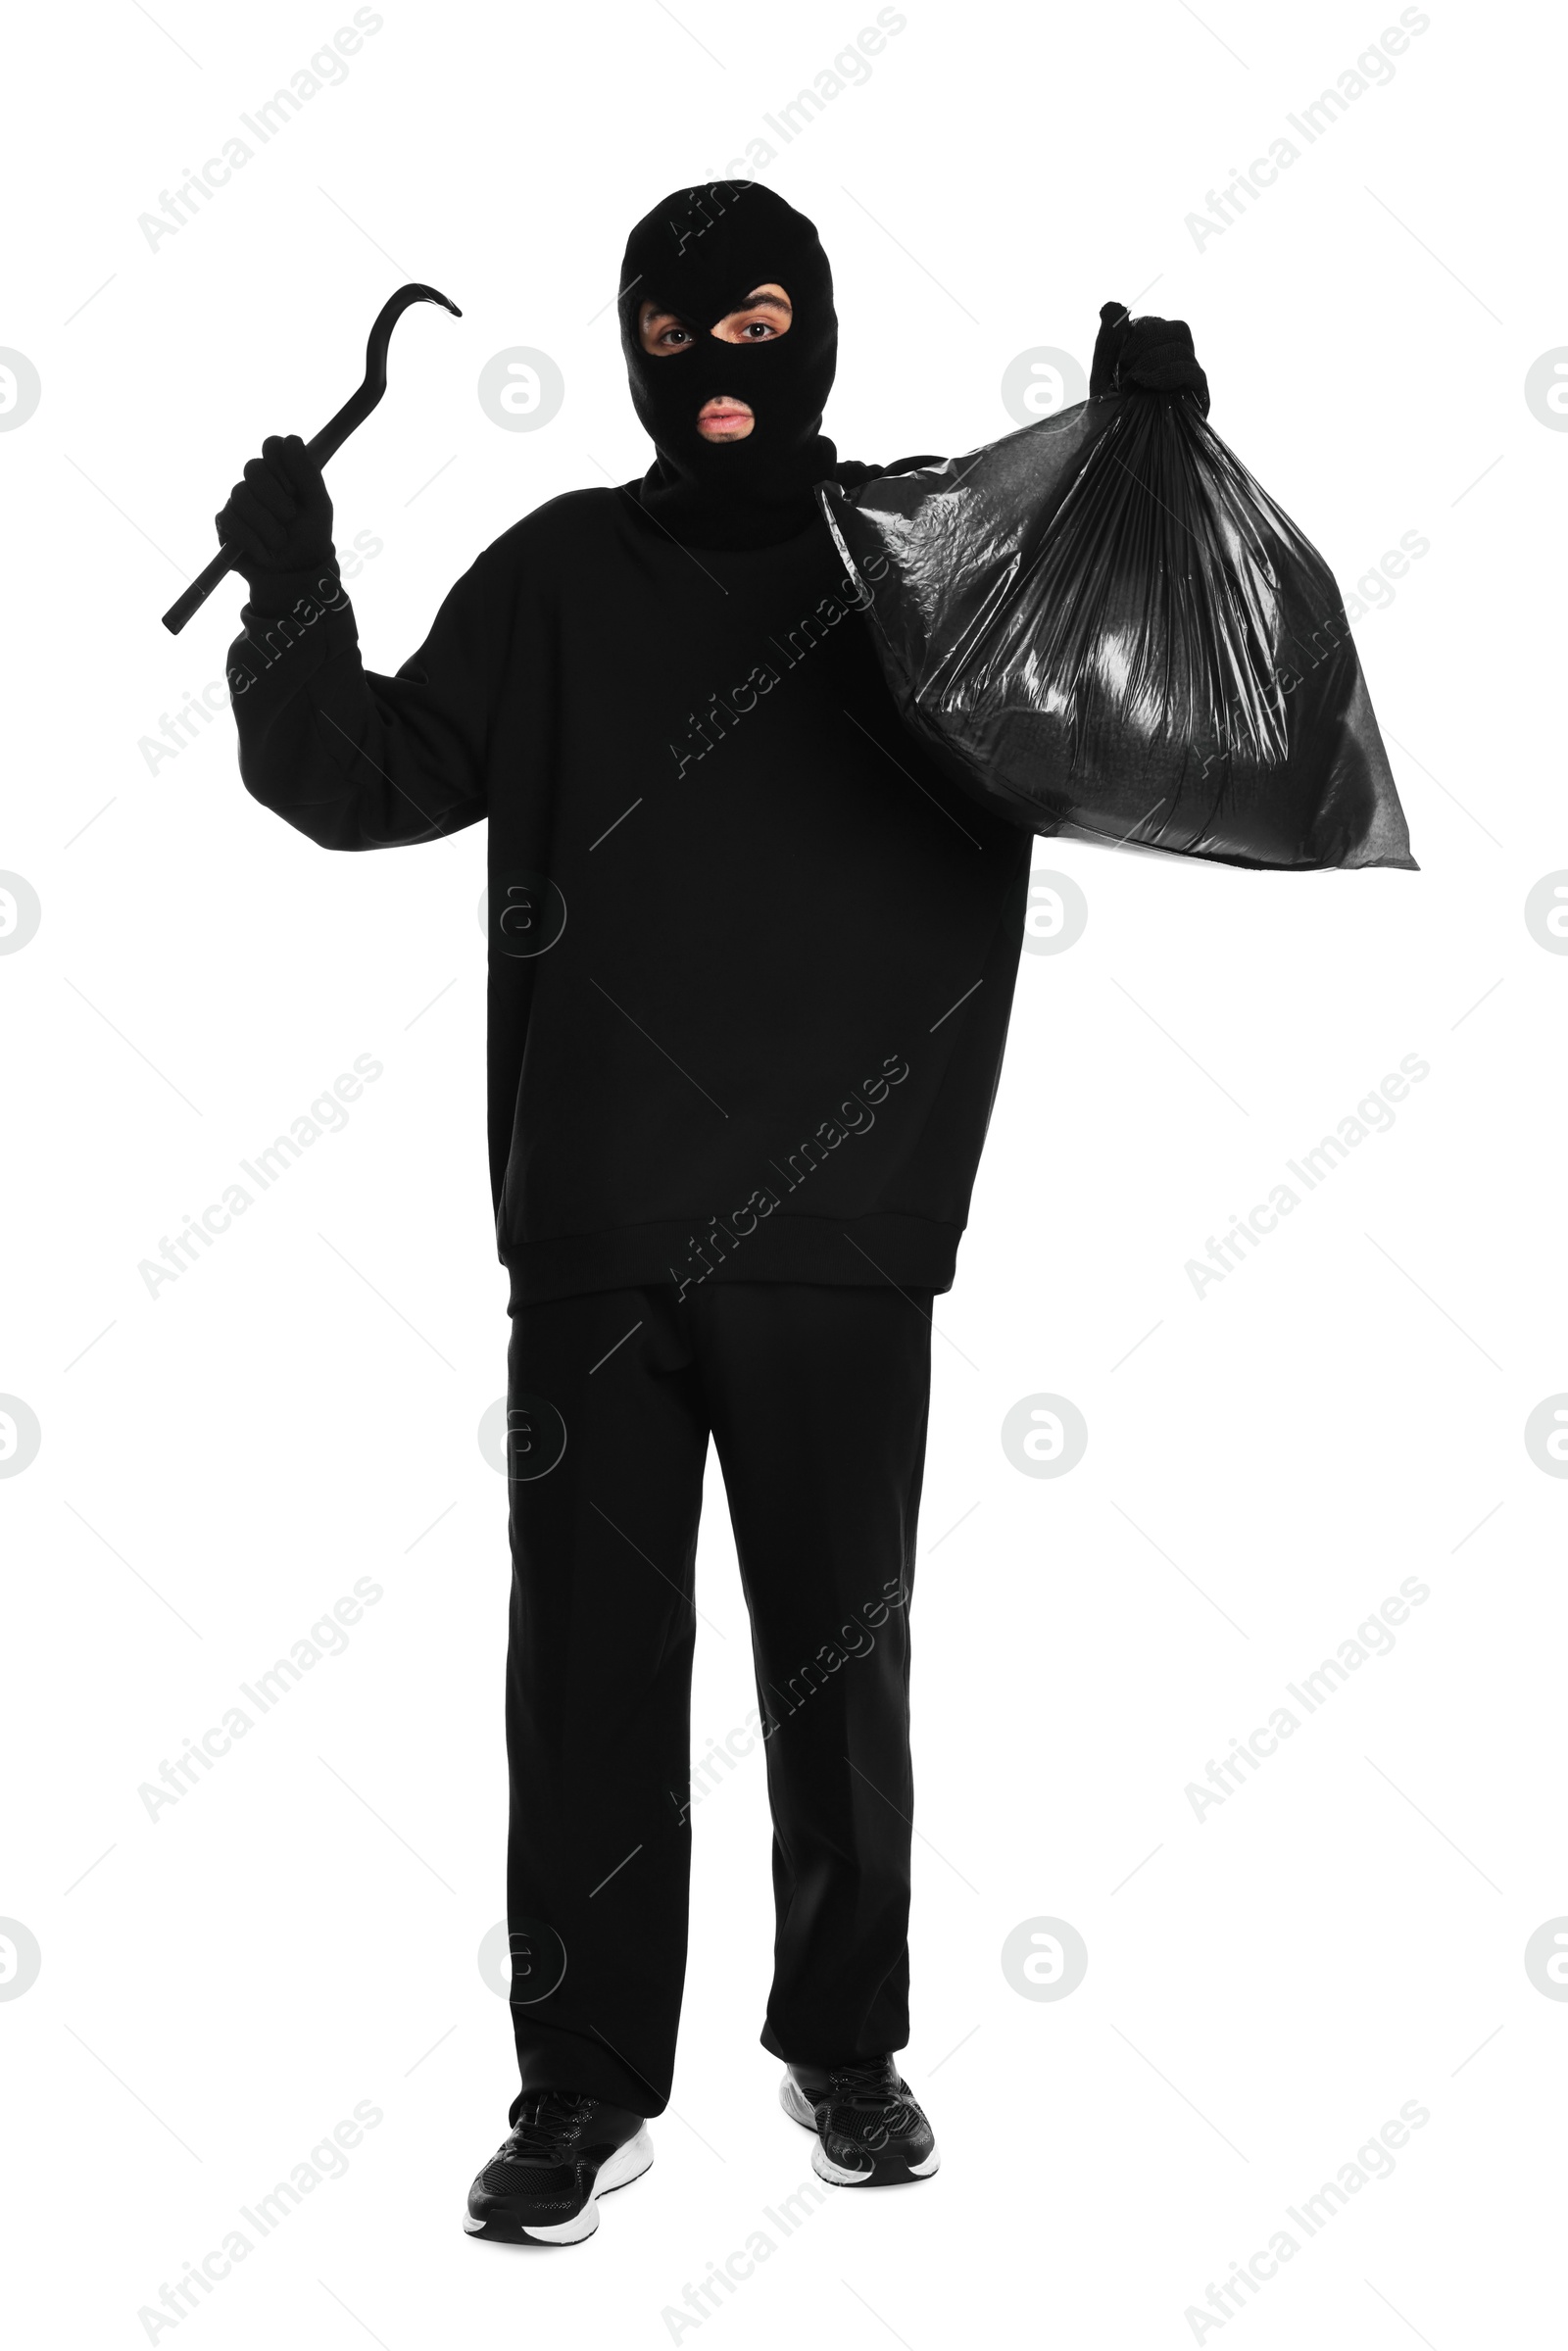 Photo of Thief in balaclava with crowbar and bag raising hands on white background